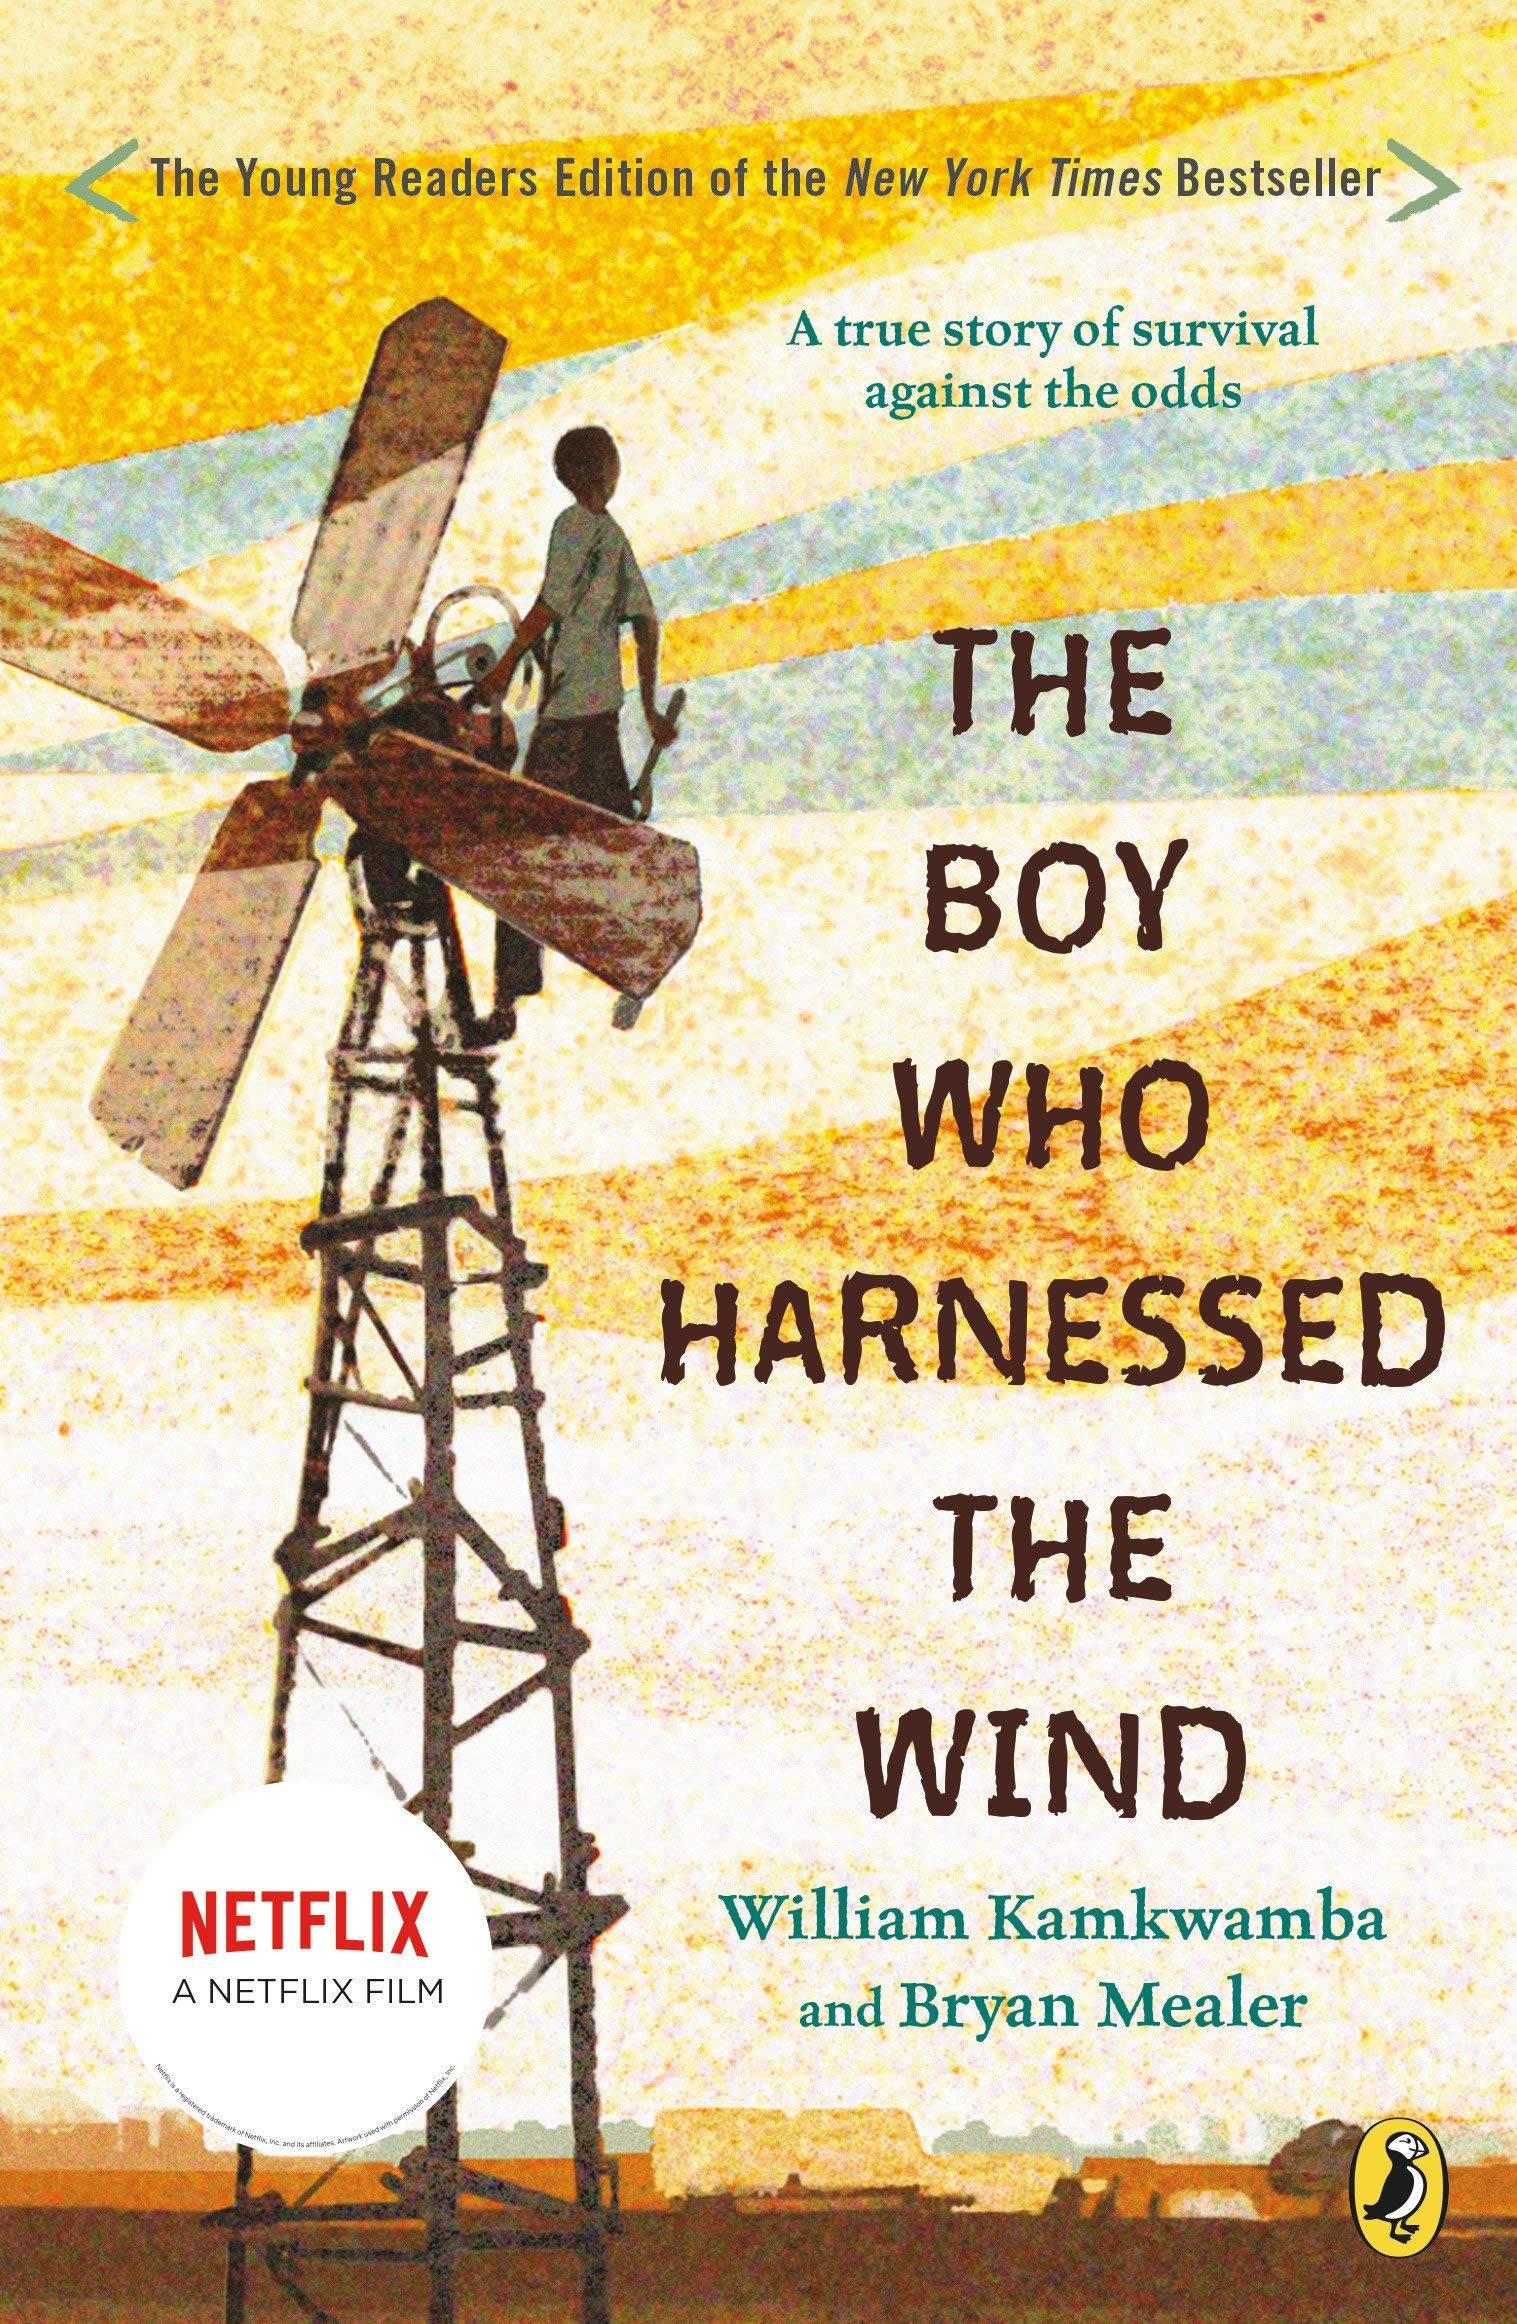 IMG : The Boy Who Harnessed The Wind